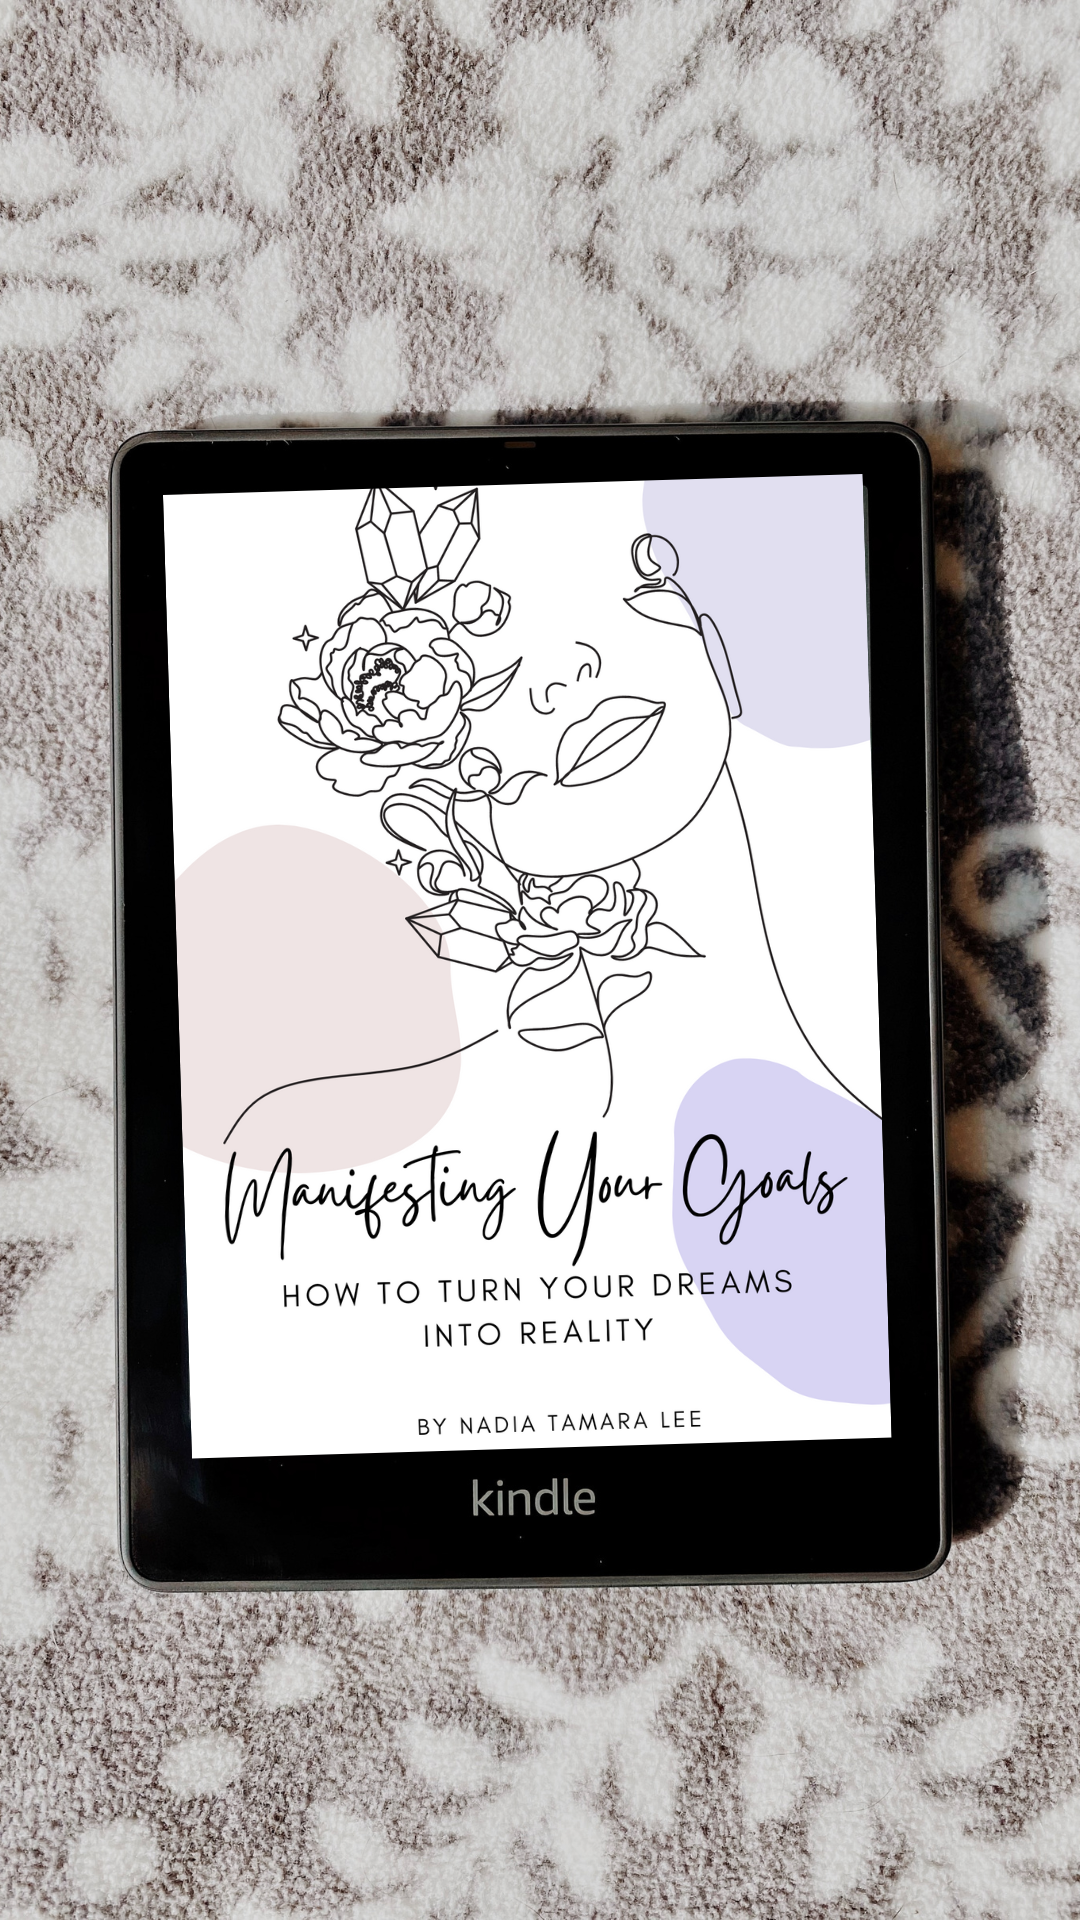 Manifesting Your Goals: How to Turn Your Dreams Into Reality